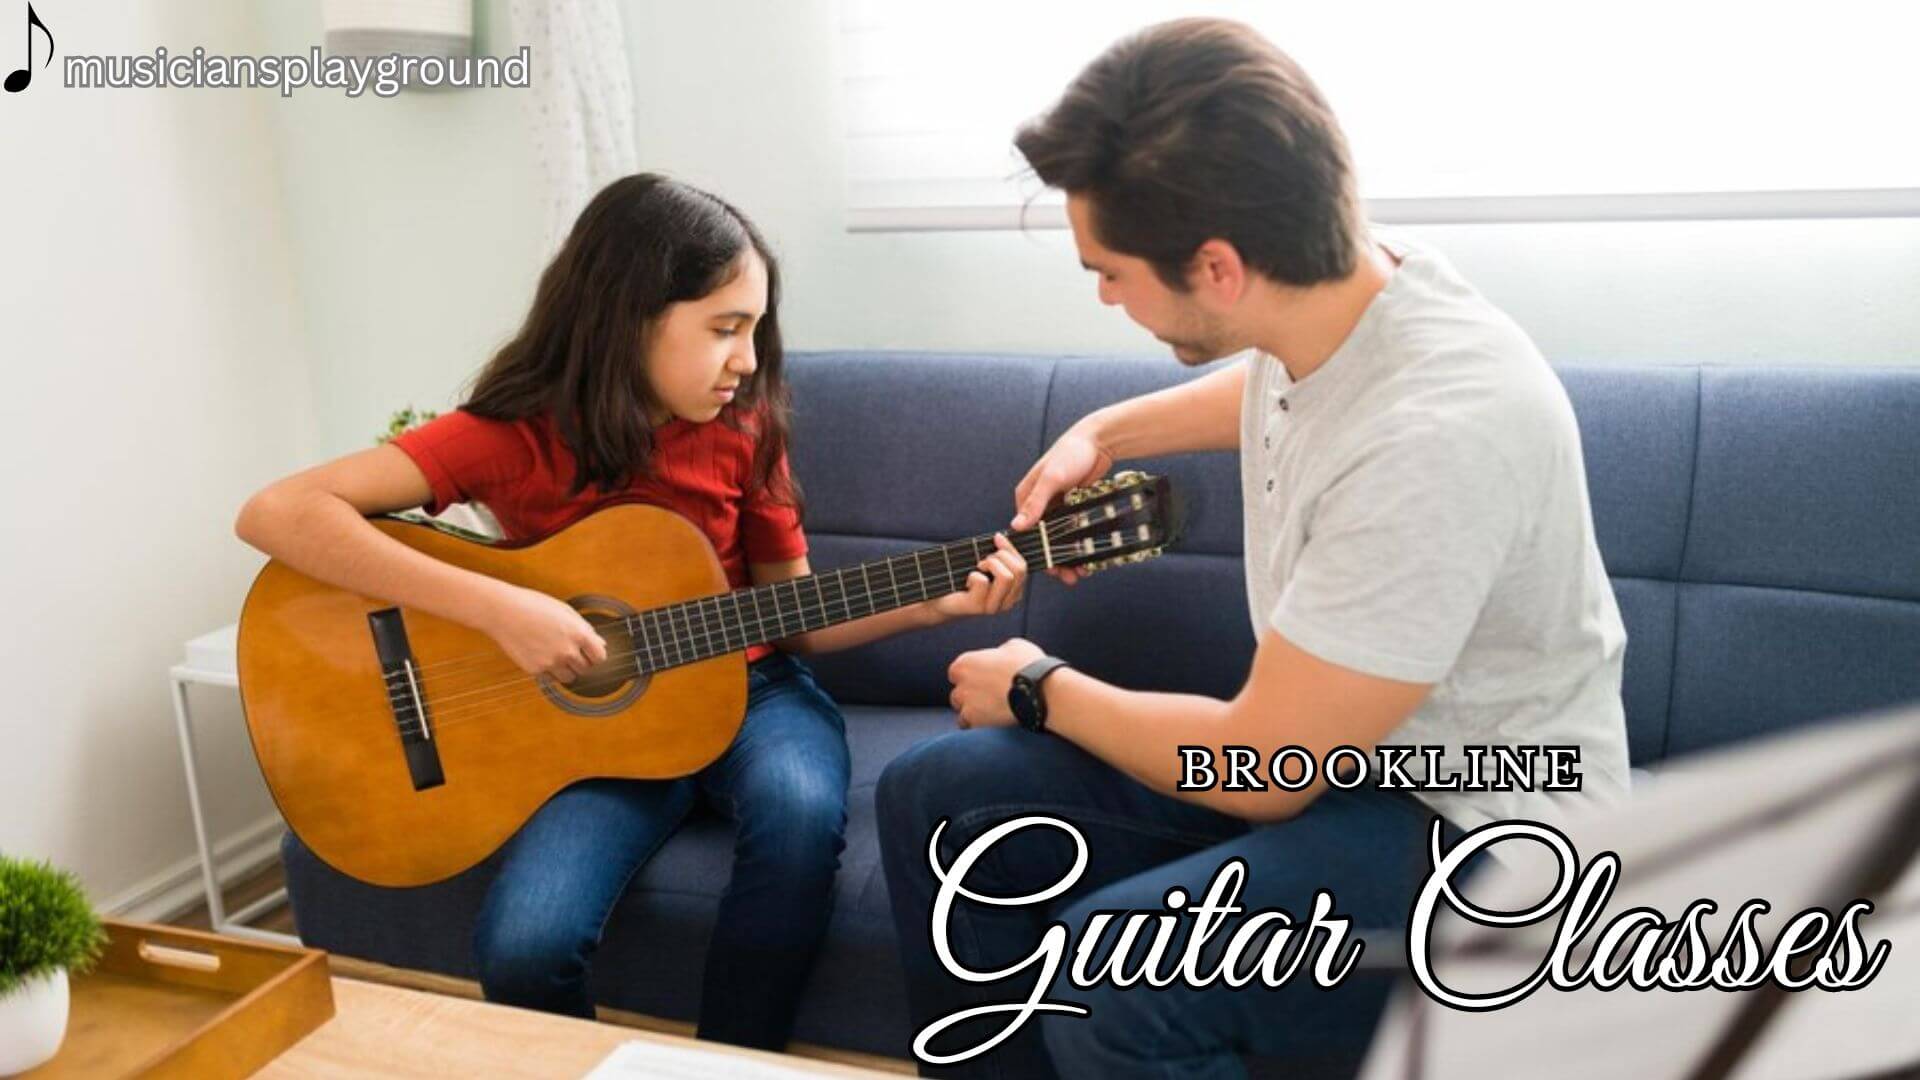 Learn to Play Guitar at Guitar Classes in Brookline, Massachusetts